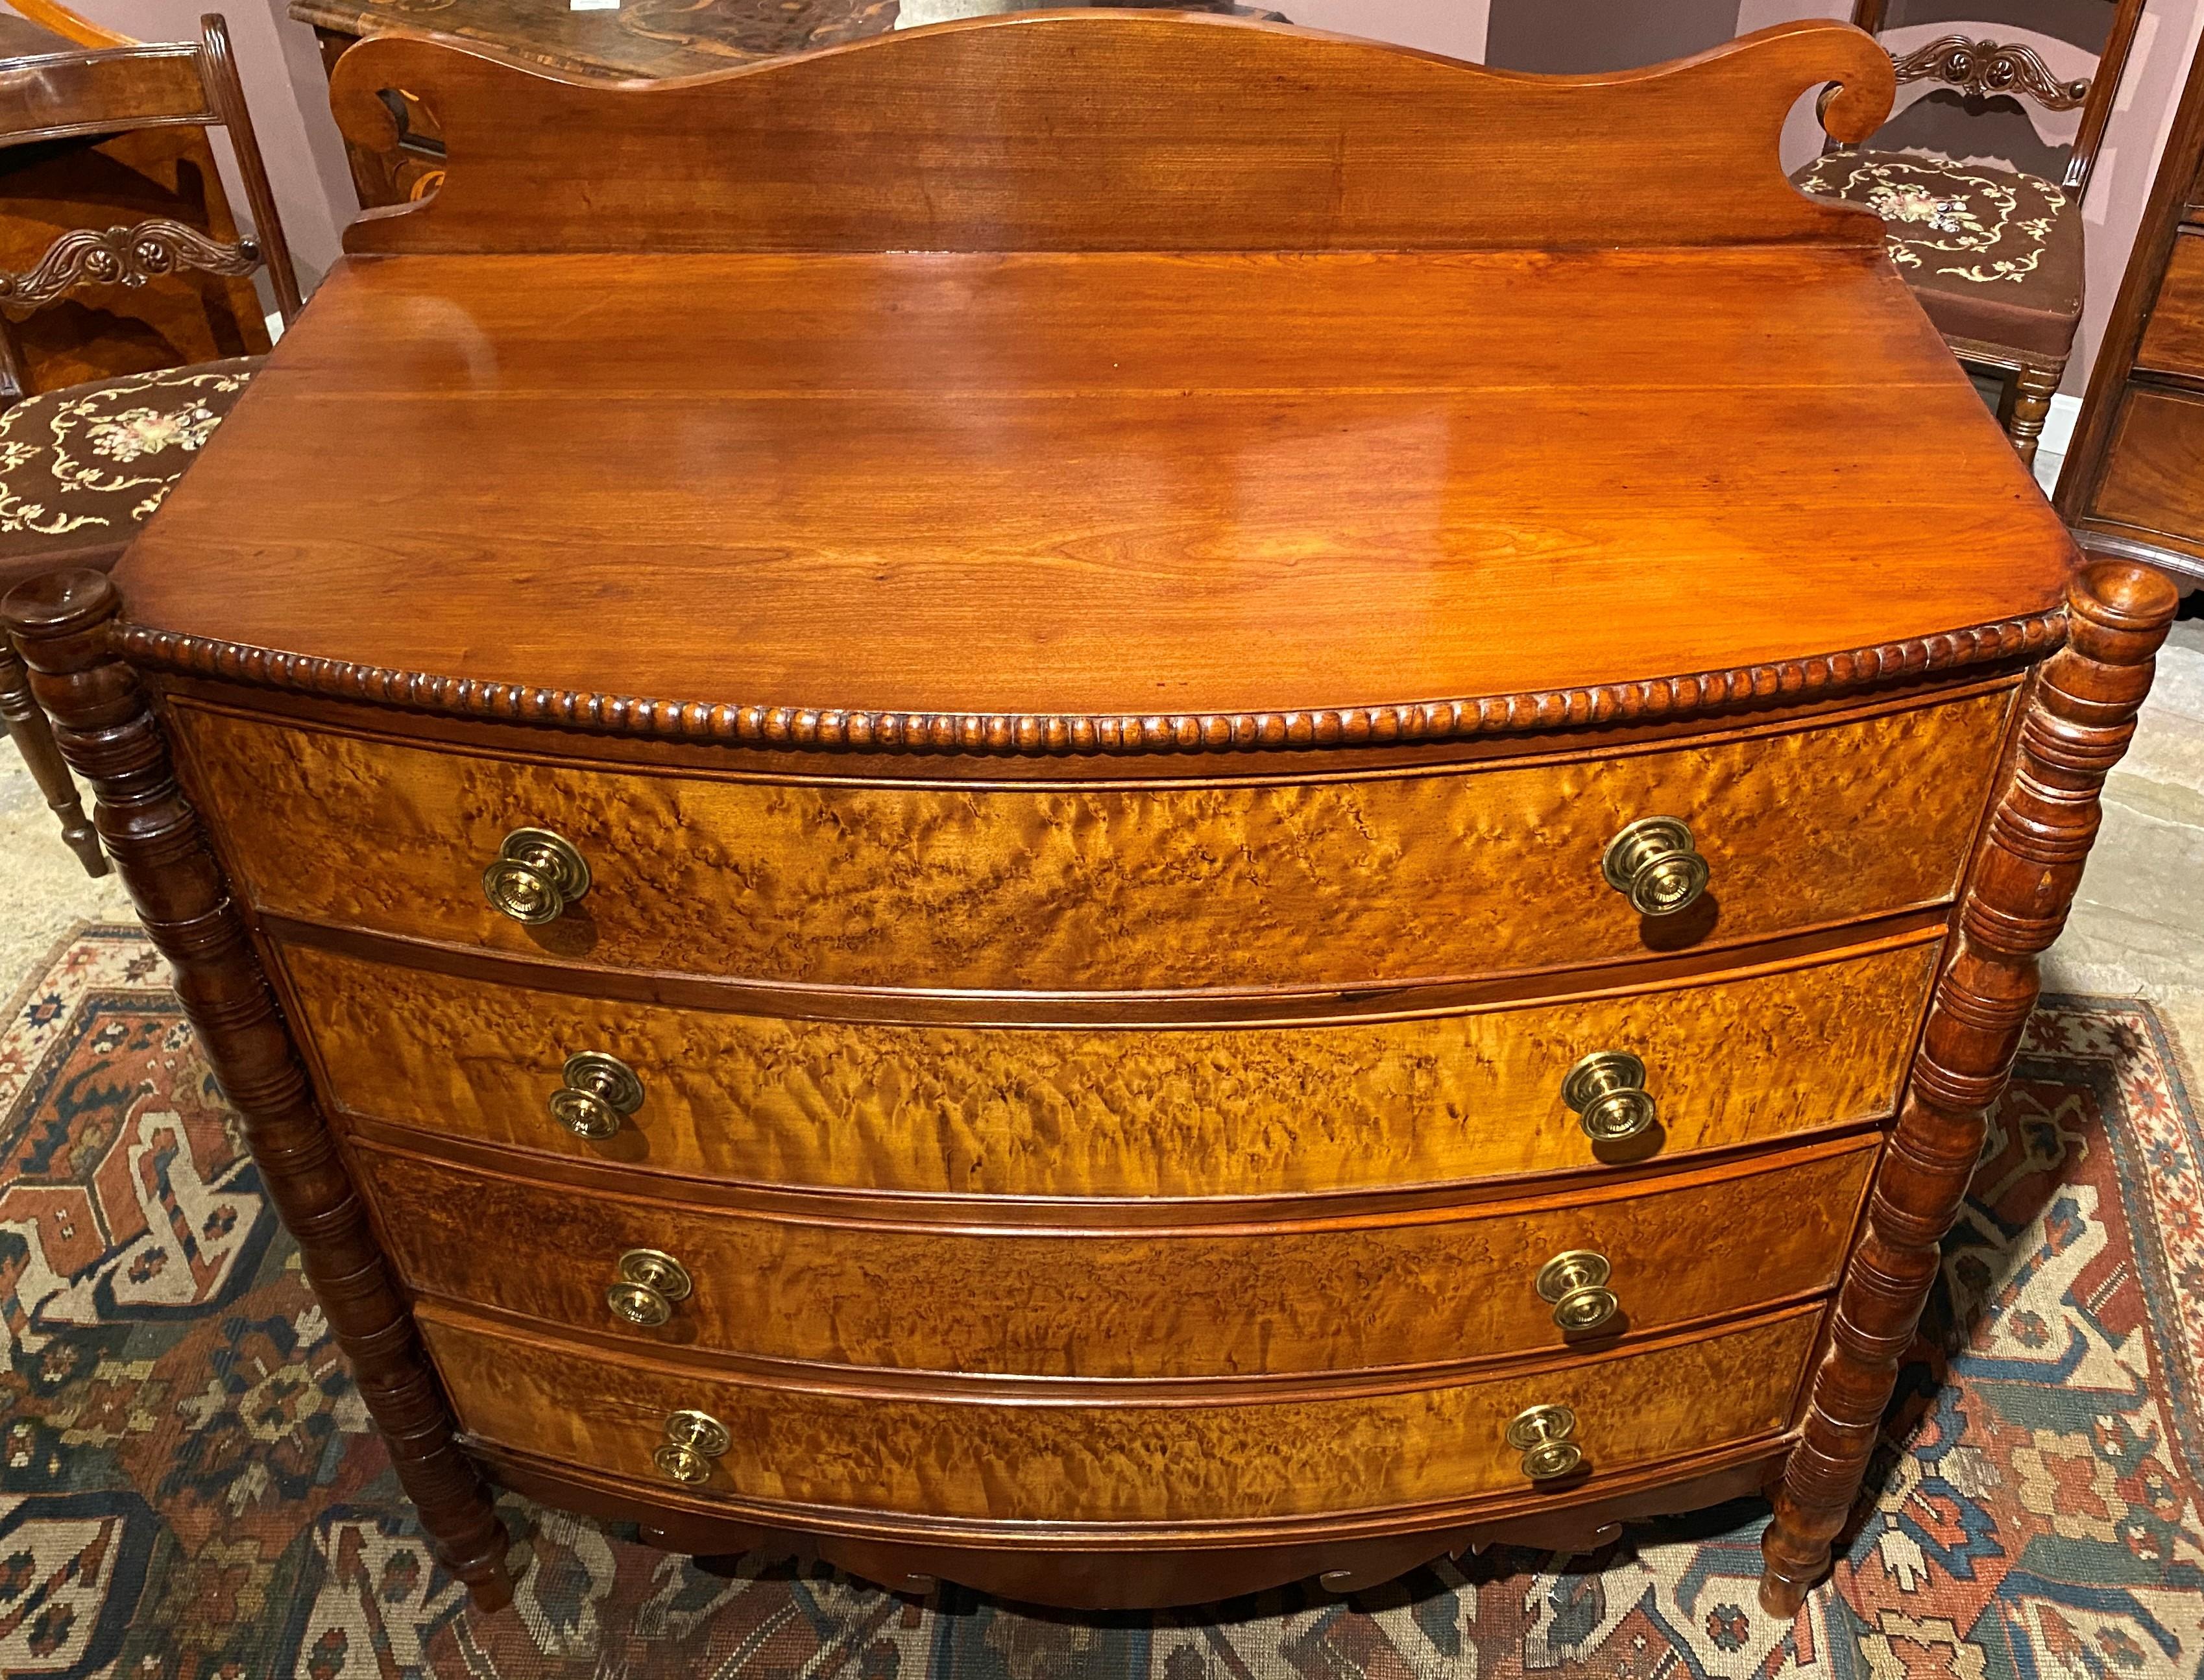 A beautiful Sheraton cherrywood swell front four-drawer chest with bird's-eye maple drawer fronts, a scroll-carved backsplash, gadrooned top edge on front and sides, turret front corners surmounting turned columns, and scroll shaped skirt, all